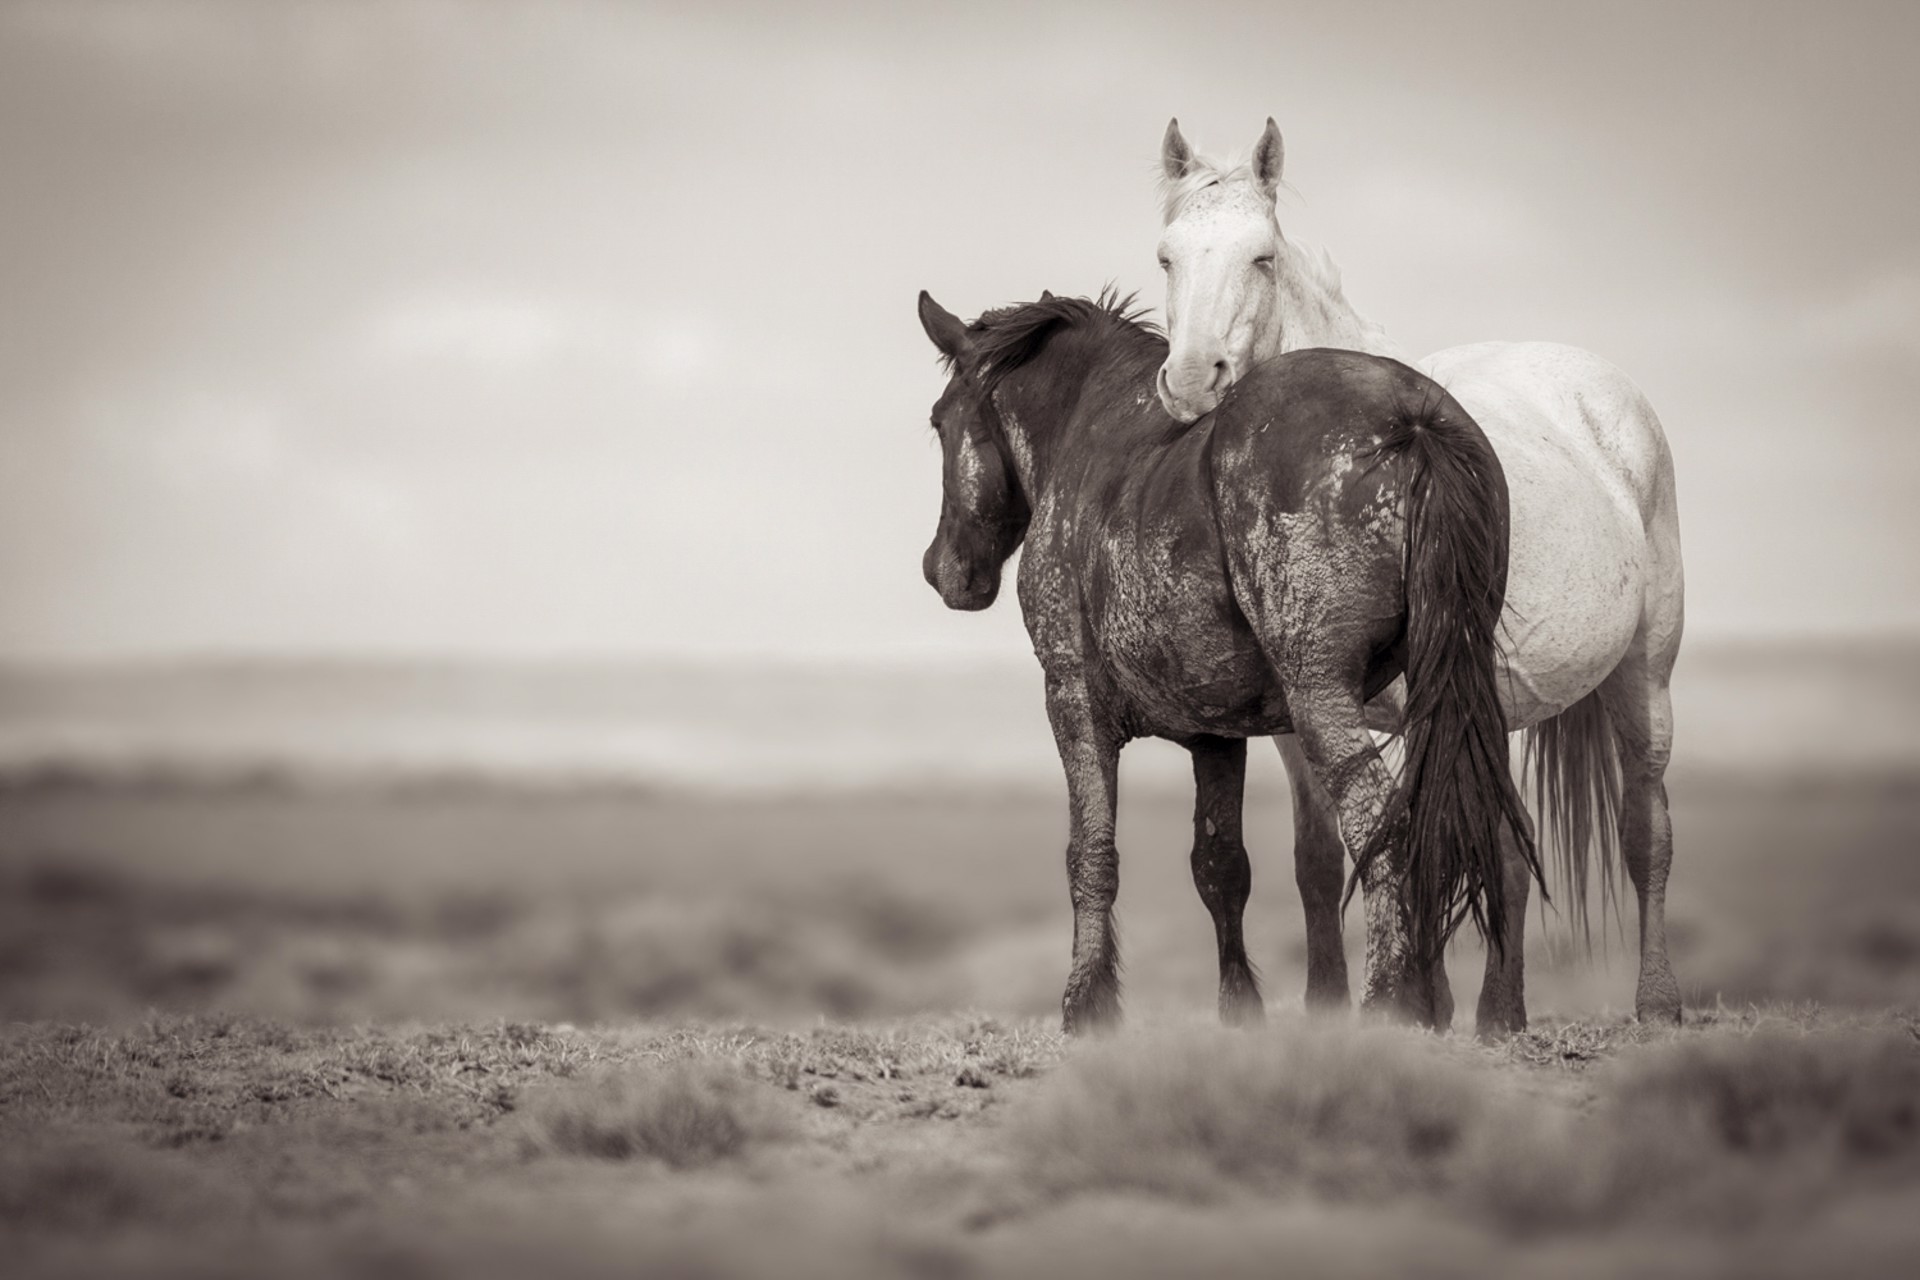 Black And White Photograph Featuring White Horse Resting Its Head On The Back Of Black Horse In Open Plain With Sepia Tone